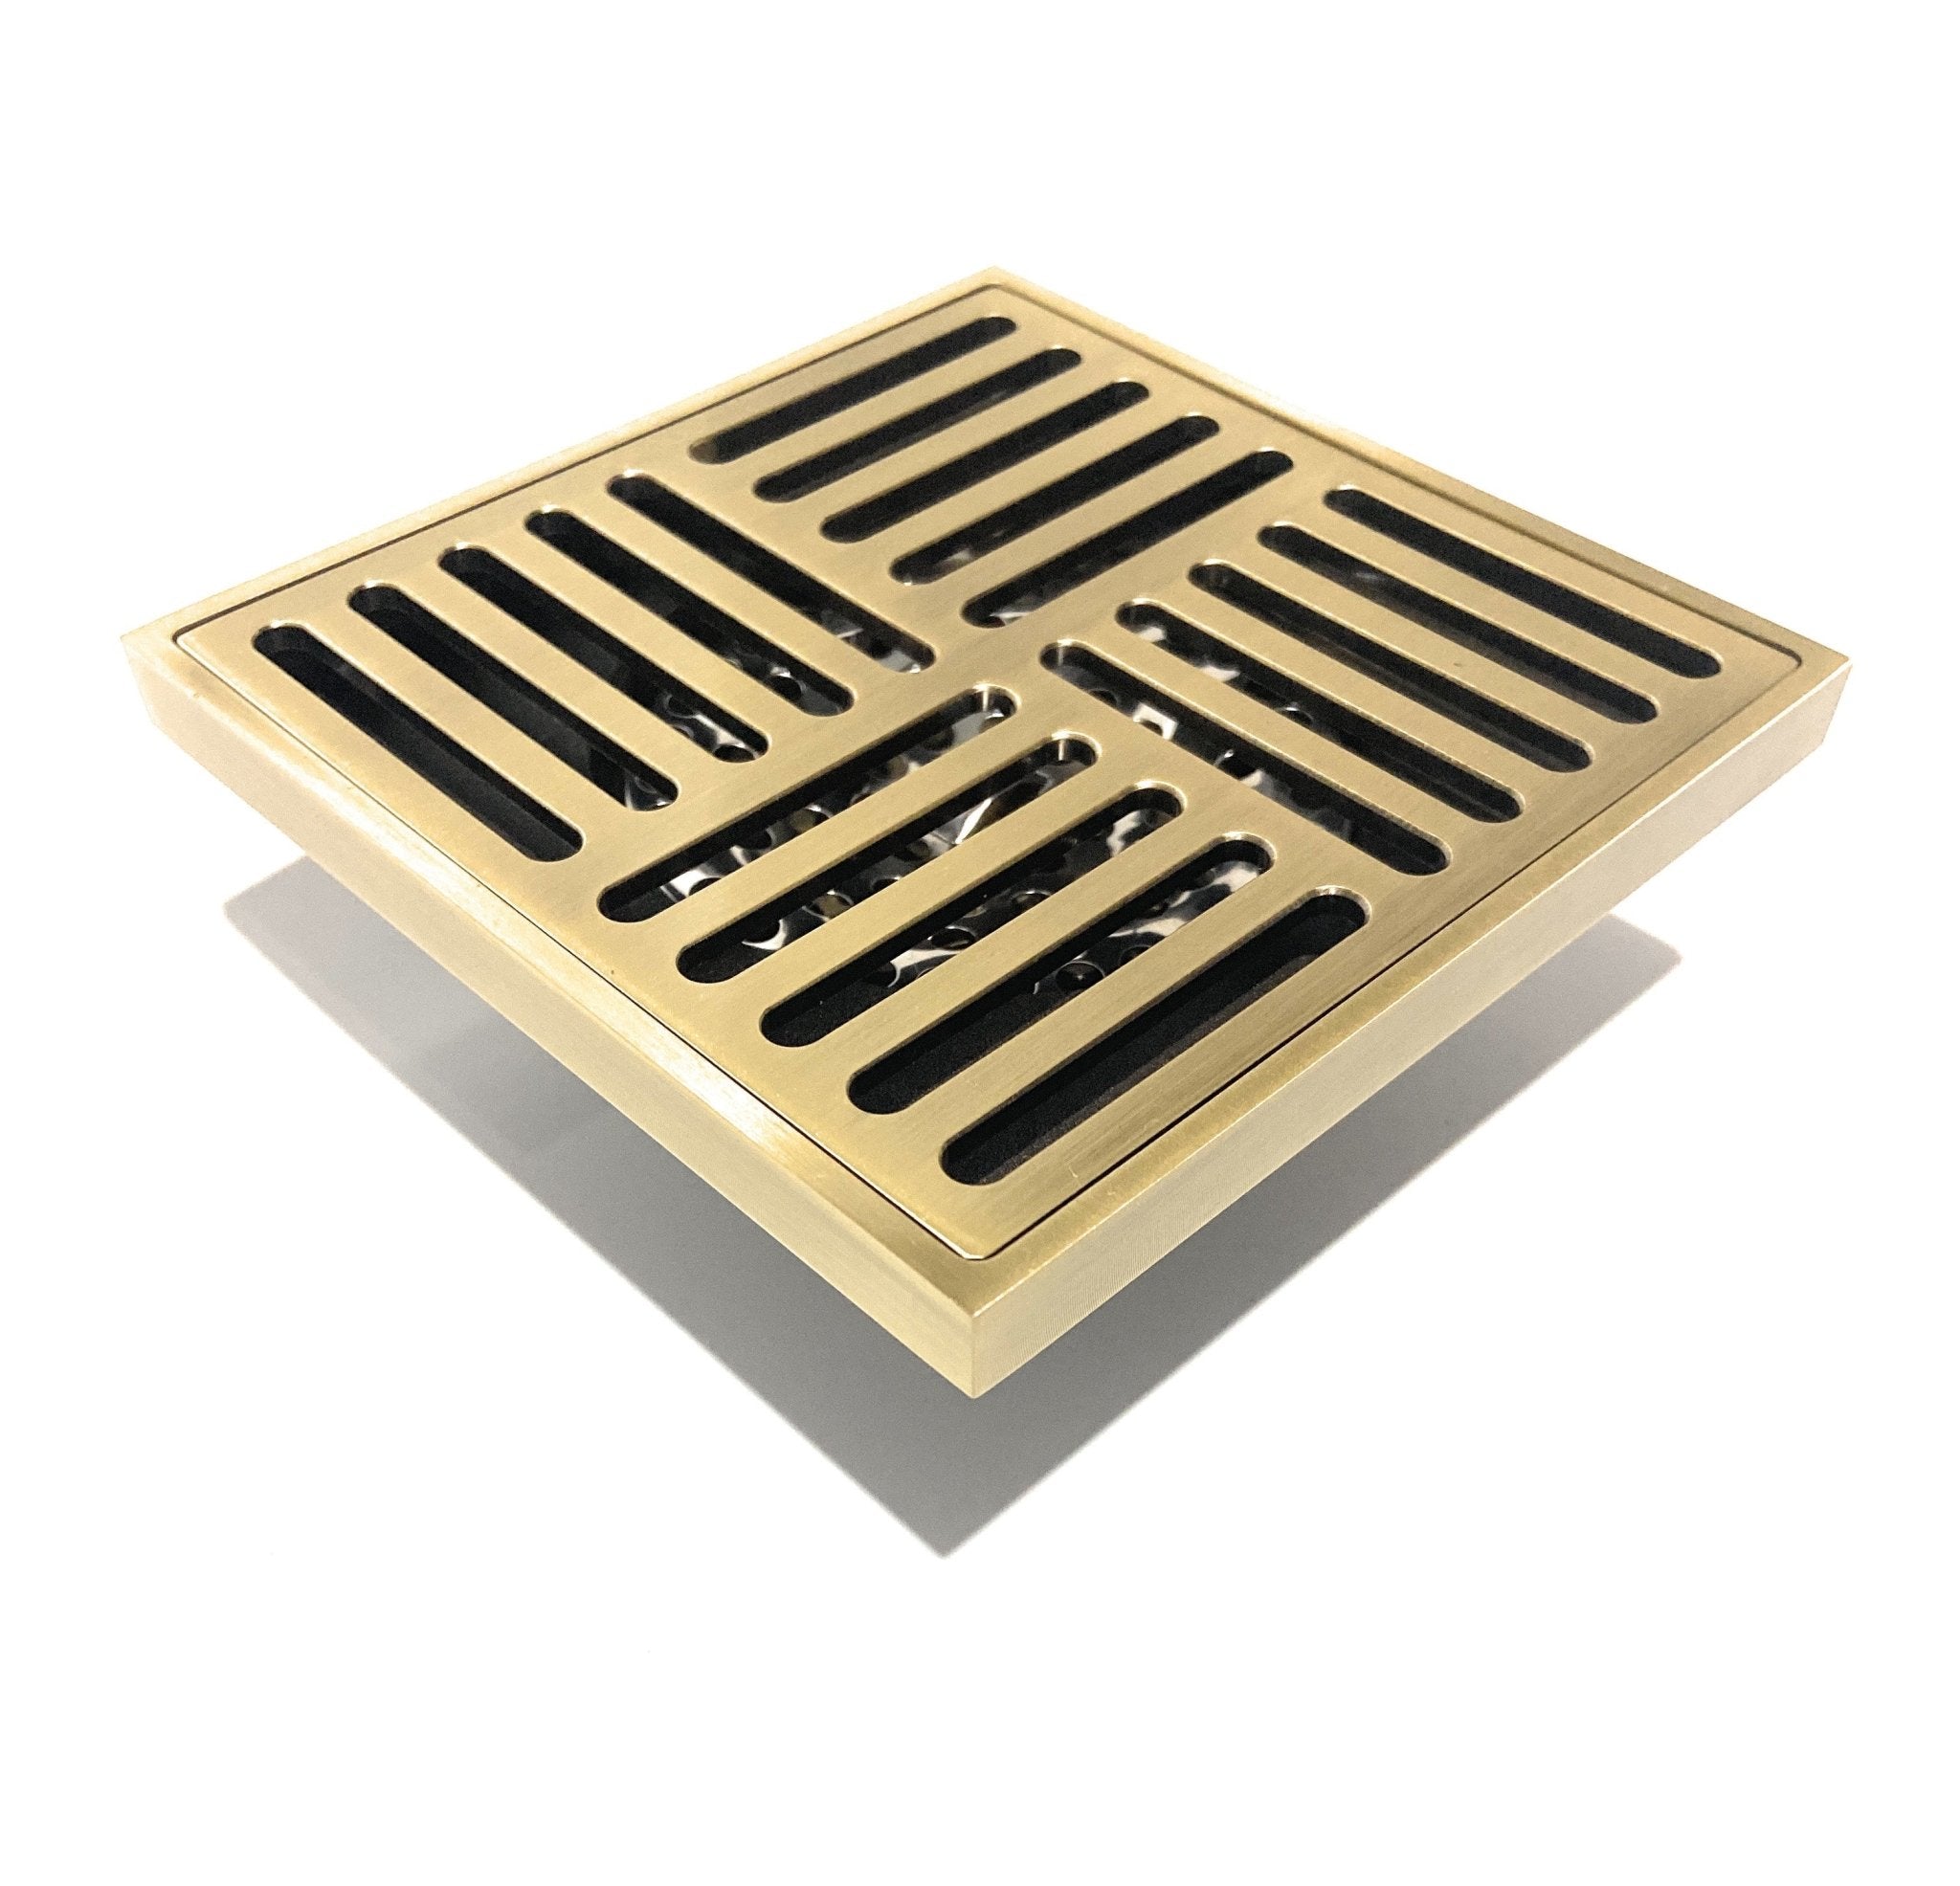 InArt Brass Square Shower Floor Drain with Removable Cover Grid Grate 5 inch Long Antique Finish - InArt-Studio-USA